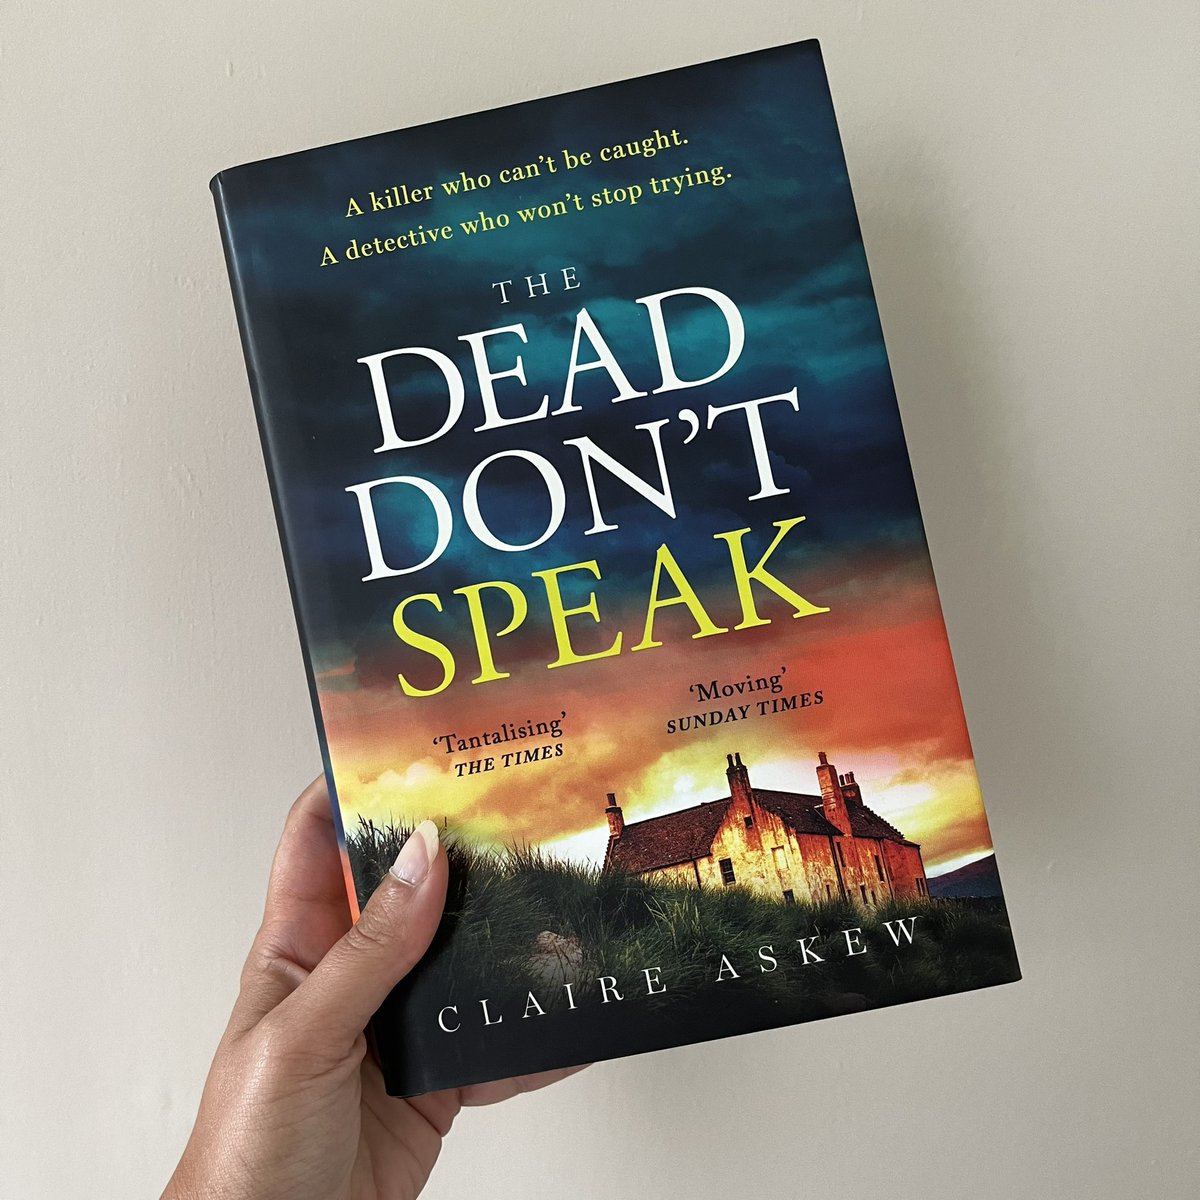 ✨GIVEAWAY✨ It’s Friday, let’s do a #Giveaway 📚 To win a copy of The Dead Don’t Speak by Claire Askew all you need to do is follow me, retweet and tag a friend. UK only, closes 6pm Monday 21st August.